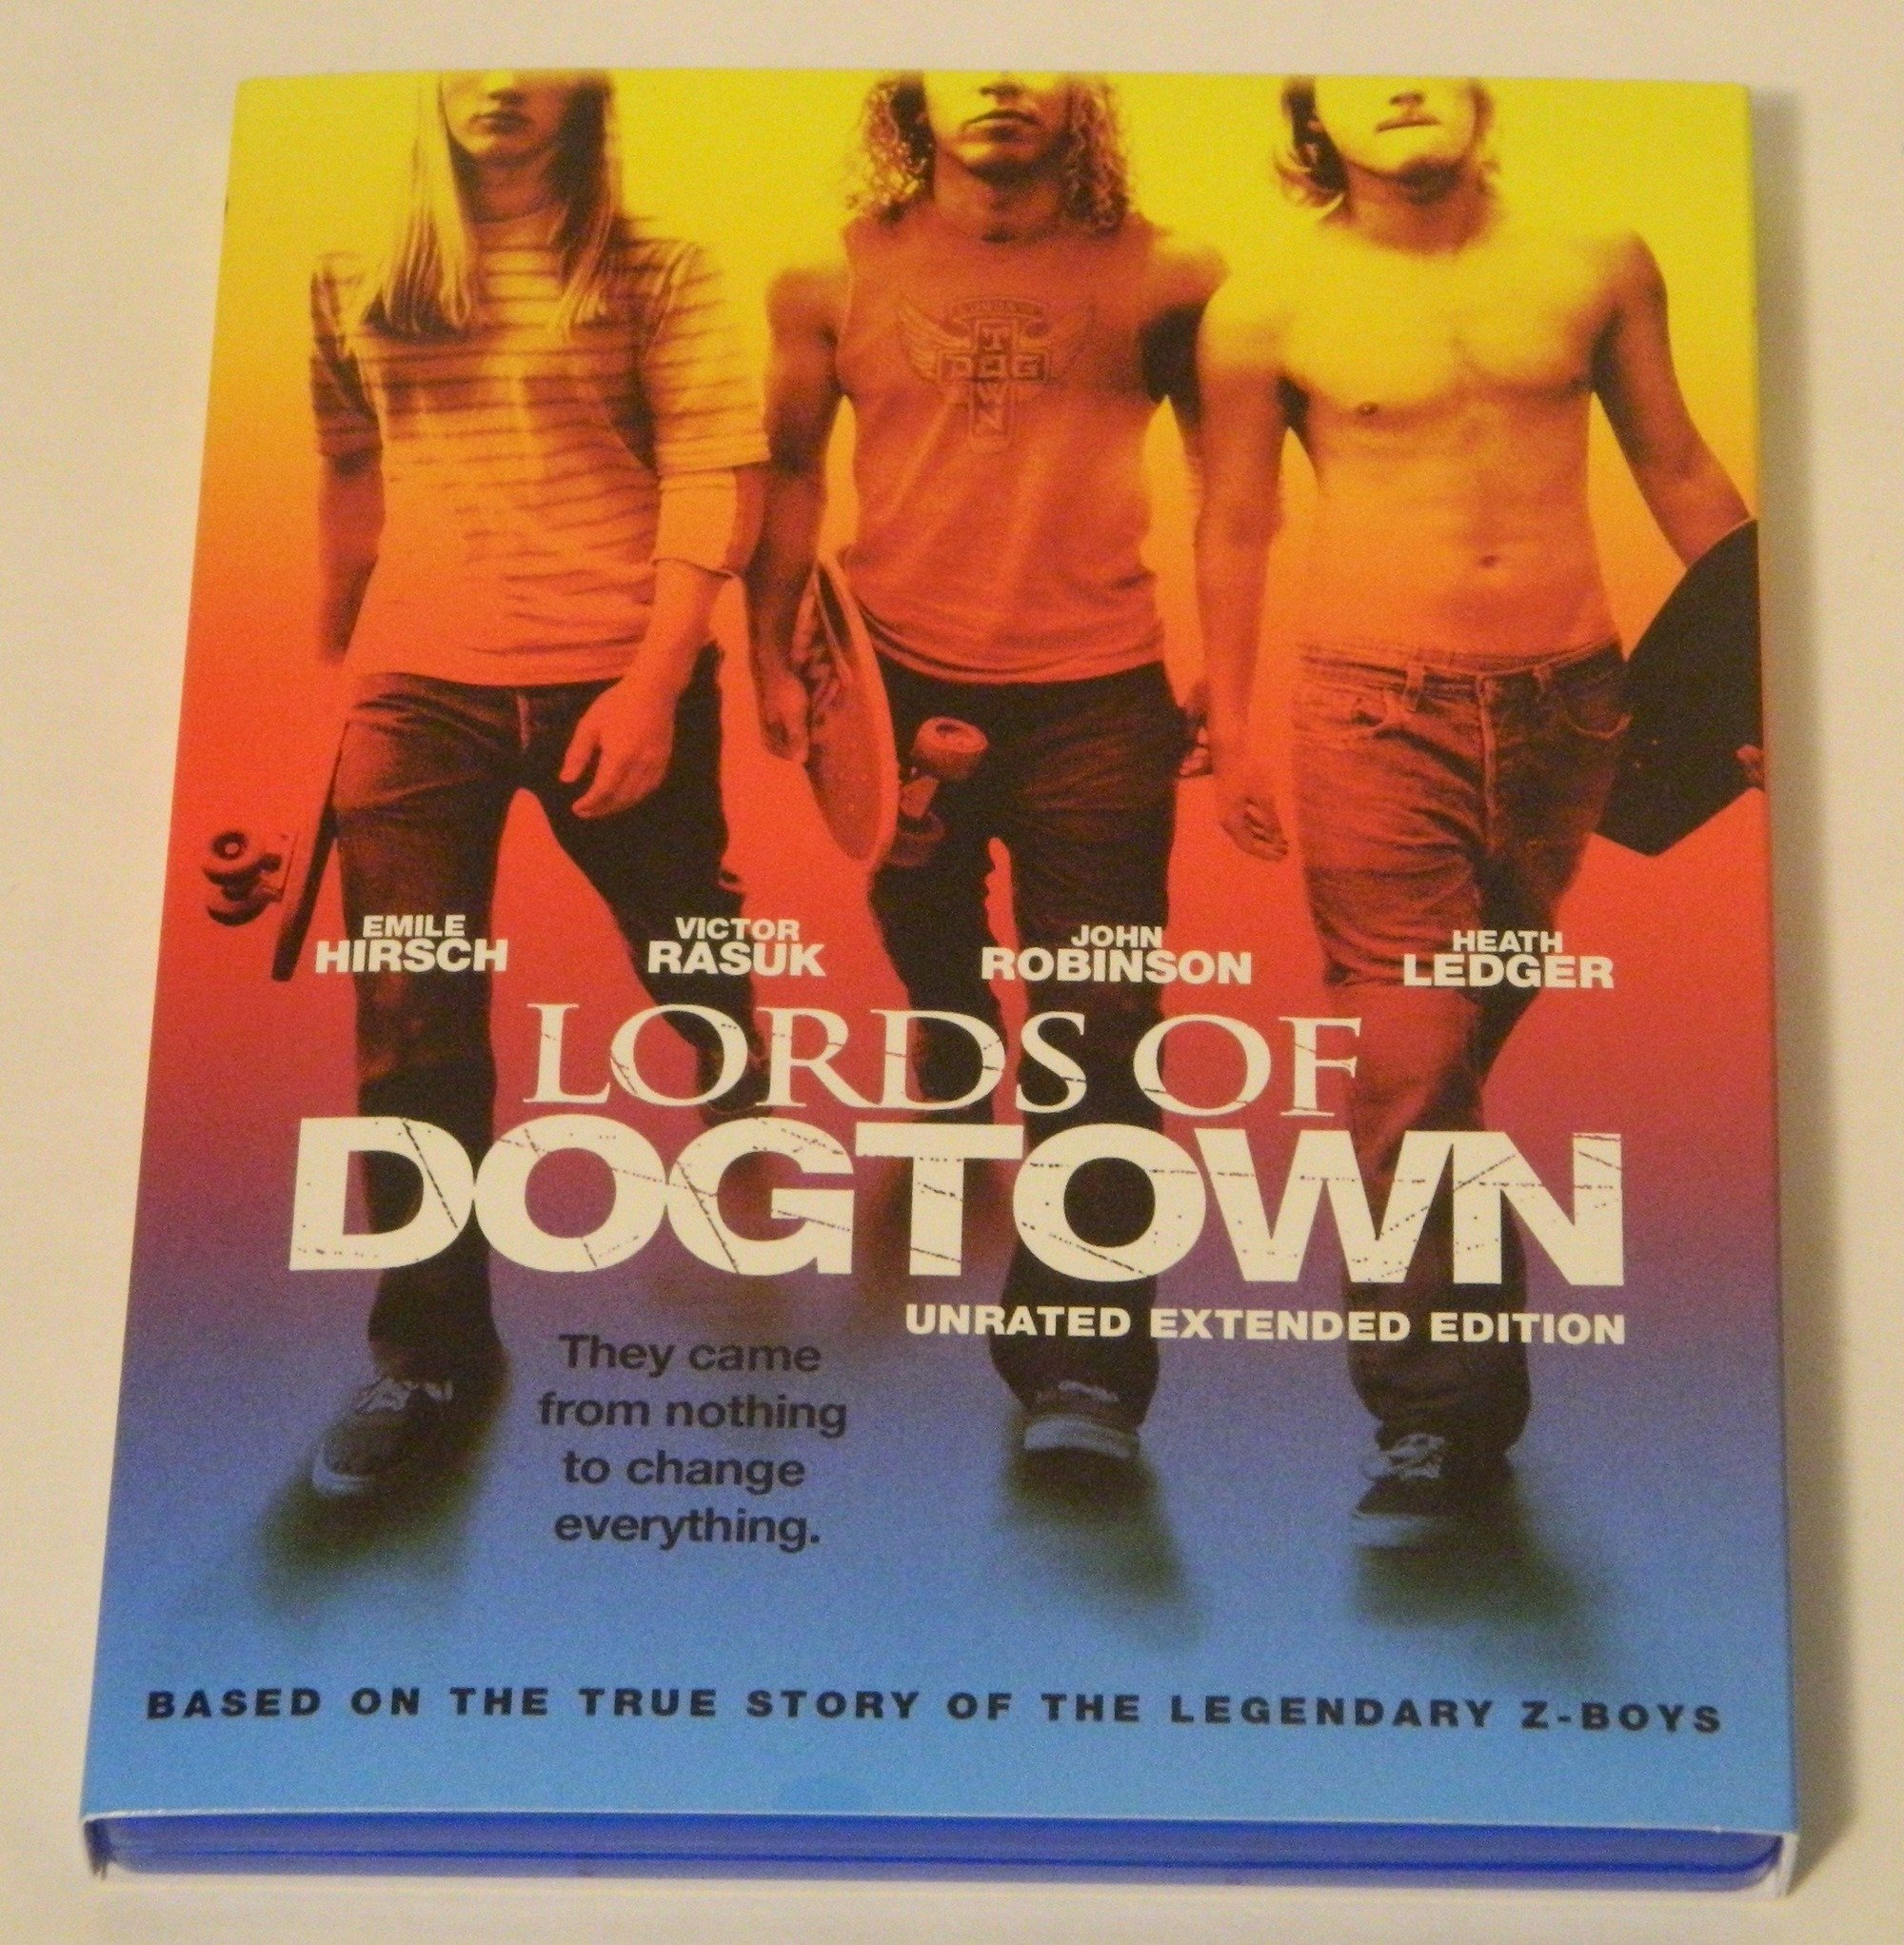 Lords of Dogtown (Unrated Extended Edition) (Walmart Exclusive) (Blu-ray)  (Steelbook) (Walmart Exclusive), Mill Creek, Drama 